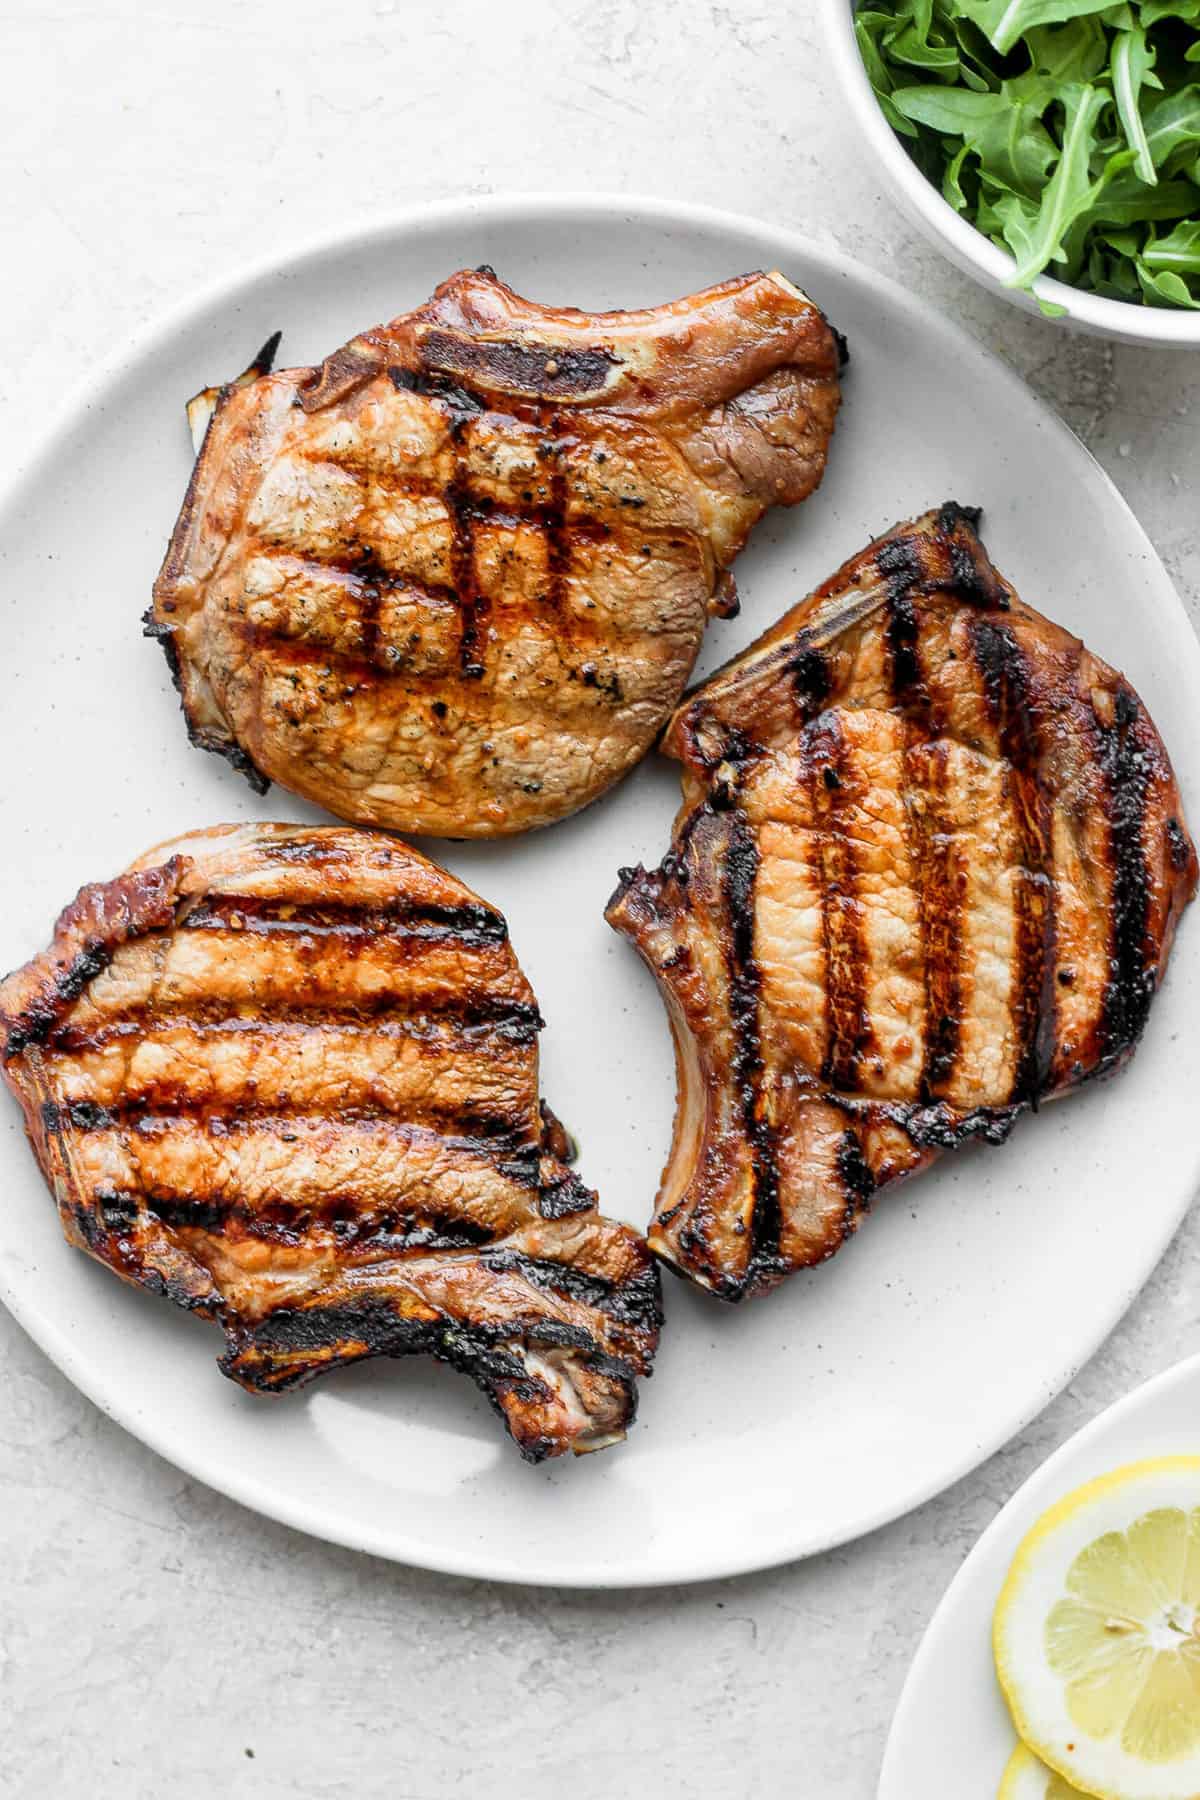 https://fitfoodiefinds.com/wp-content/uploads/2021/07/grilled-pork-chops-5-scaled.jpg